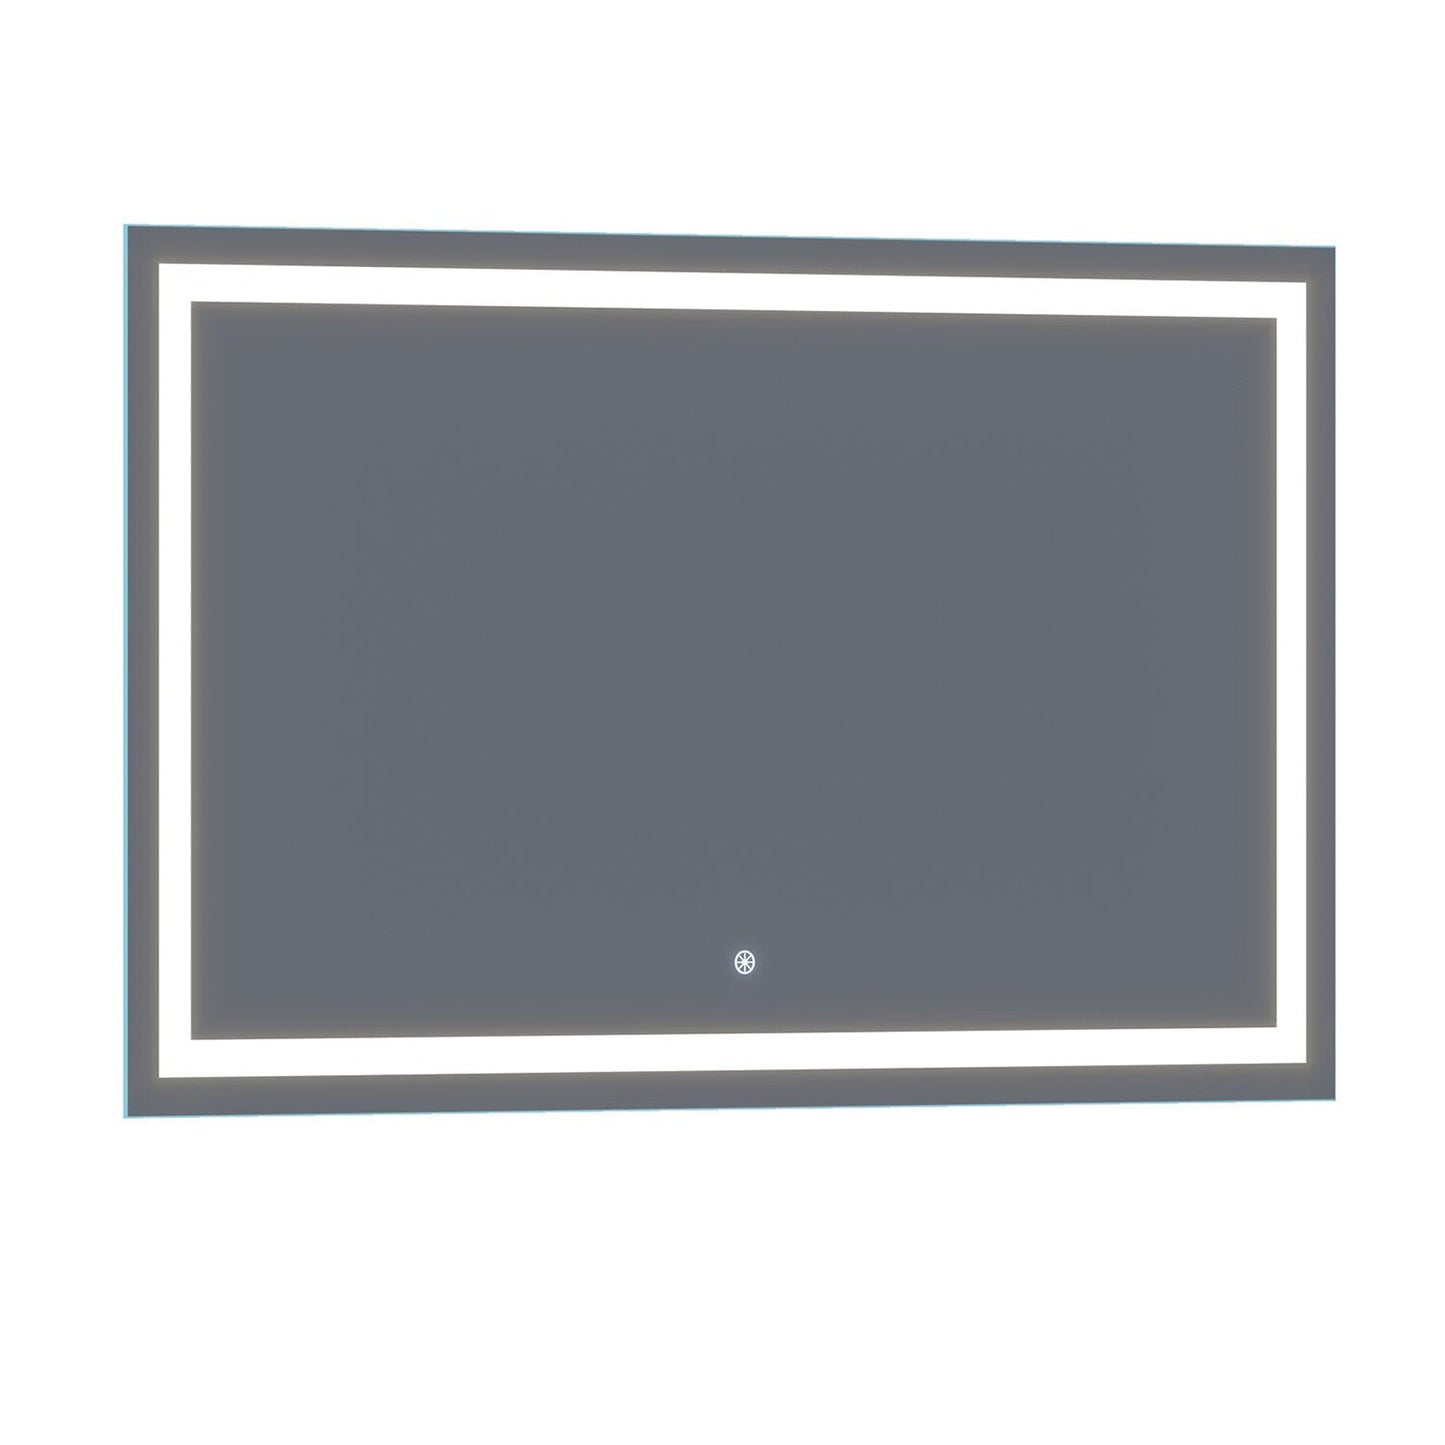 Luxaar Lumina 60" x 36" LED Lighted Vanity Mirror With Built-in Dimmer and Anti-Fog